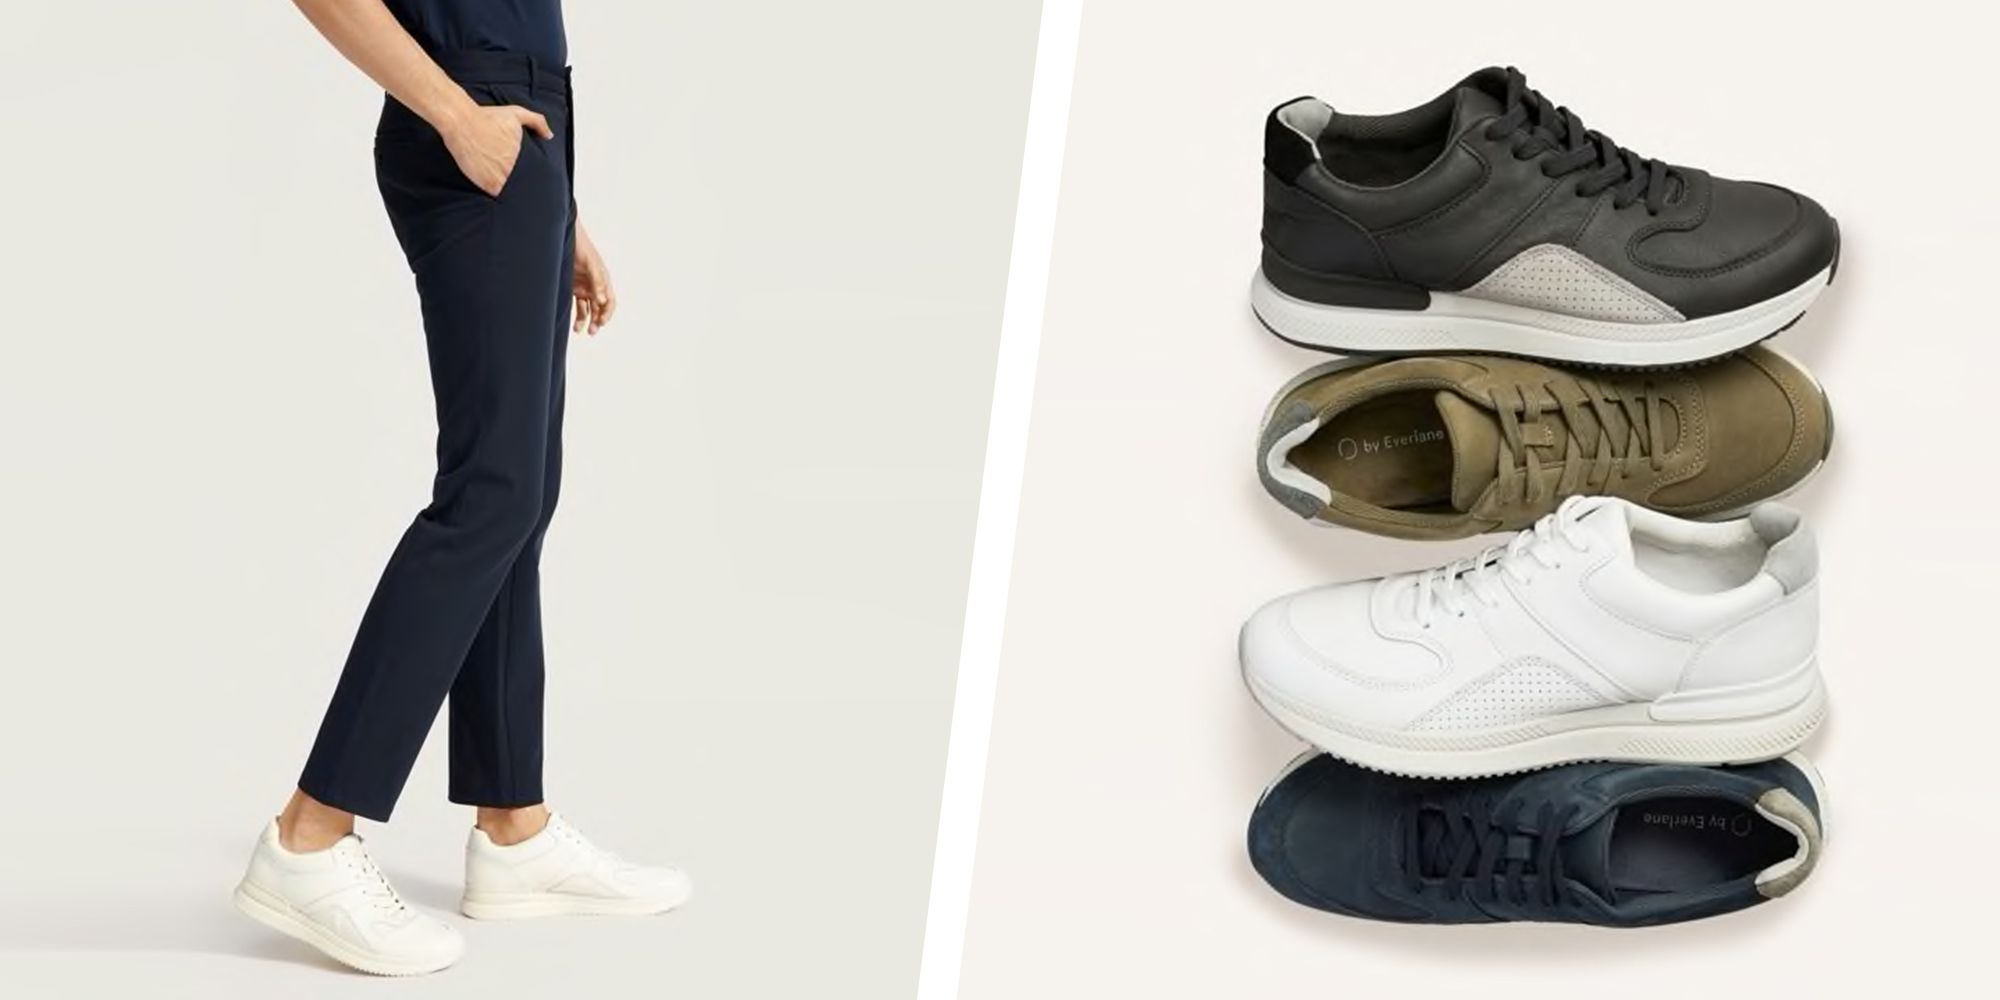 everlane shoes on sale